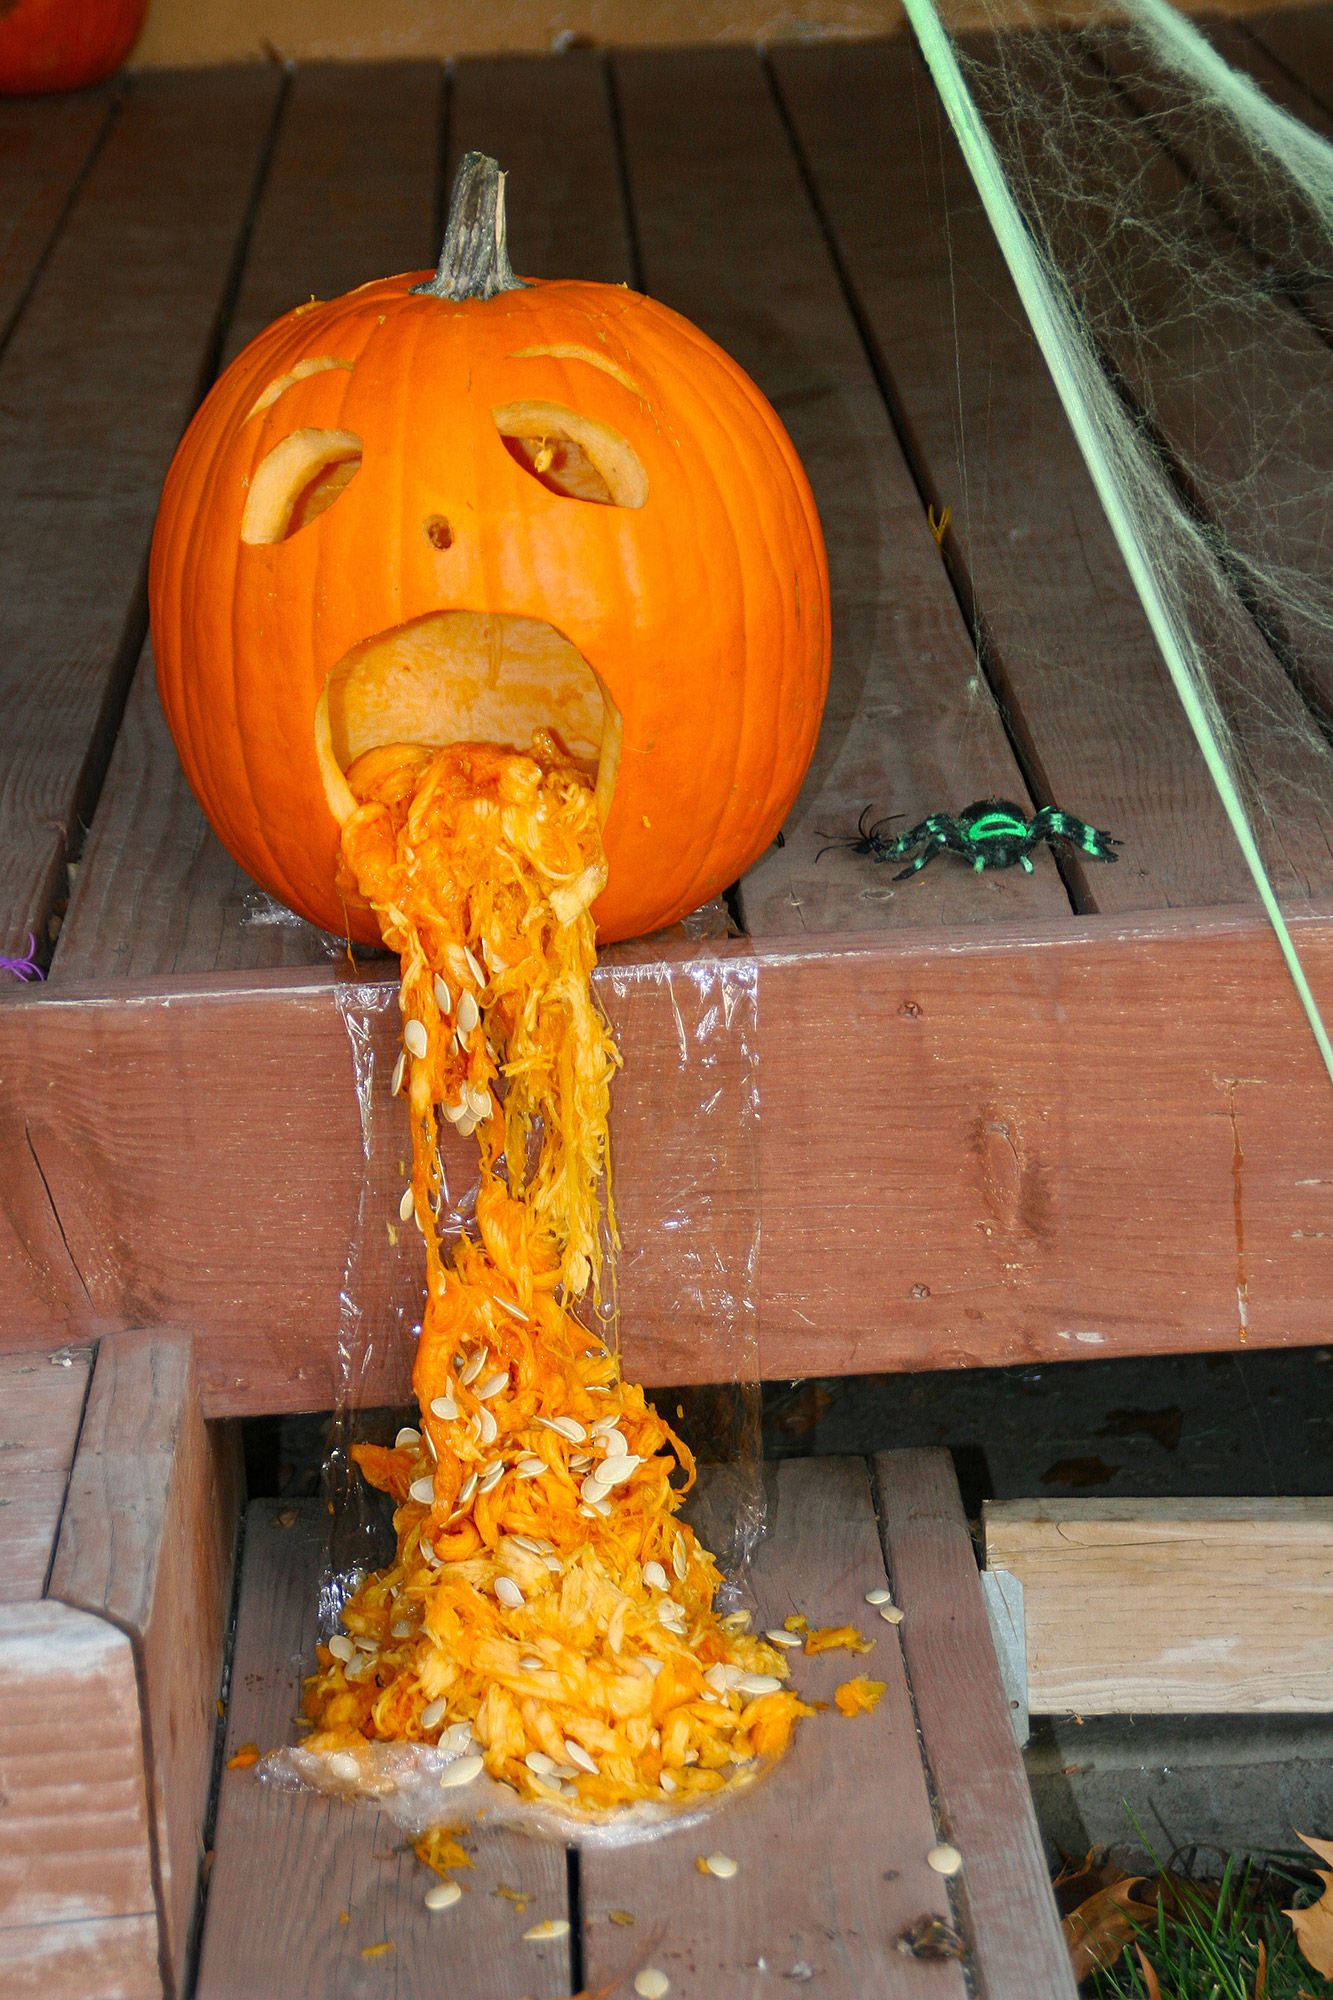 10 Reasons These Pumpkins Are Puking 0921